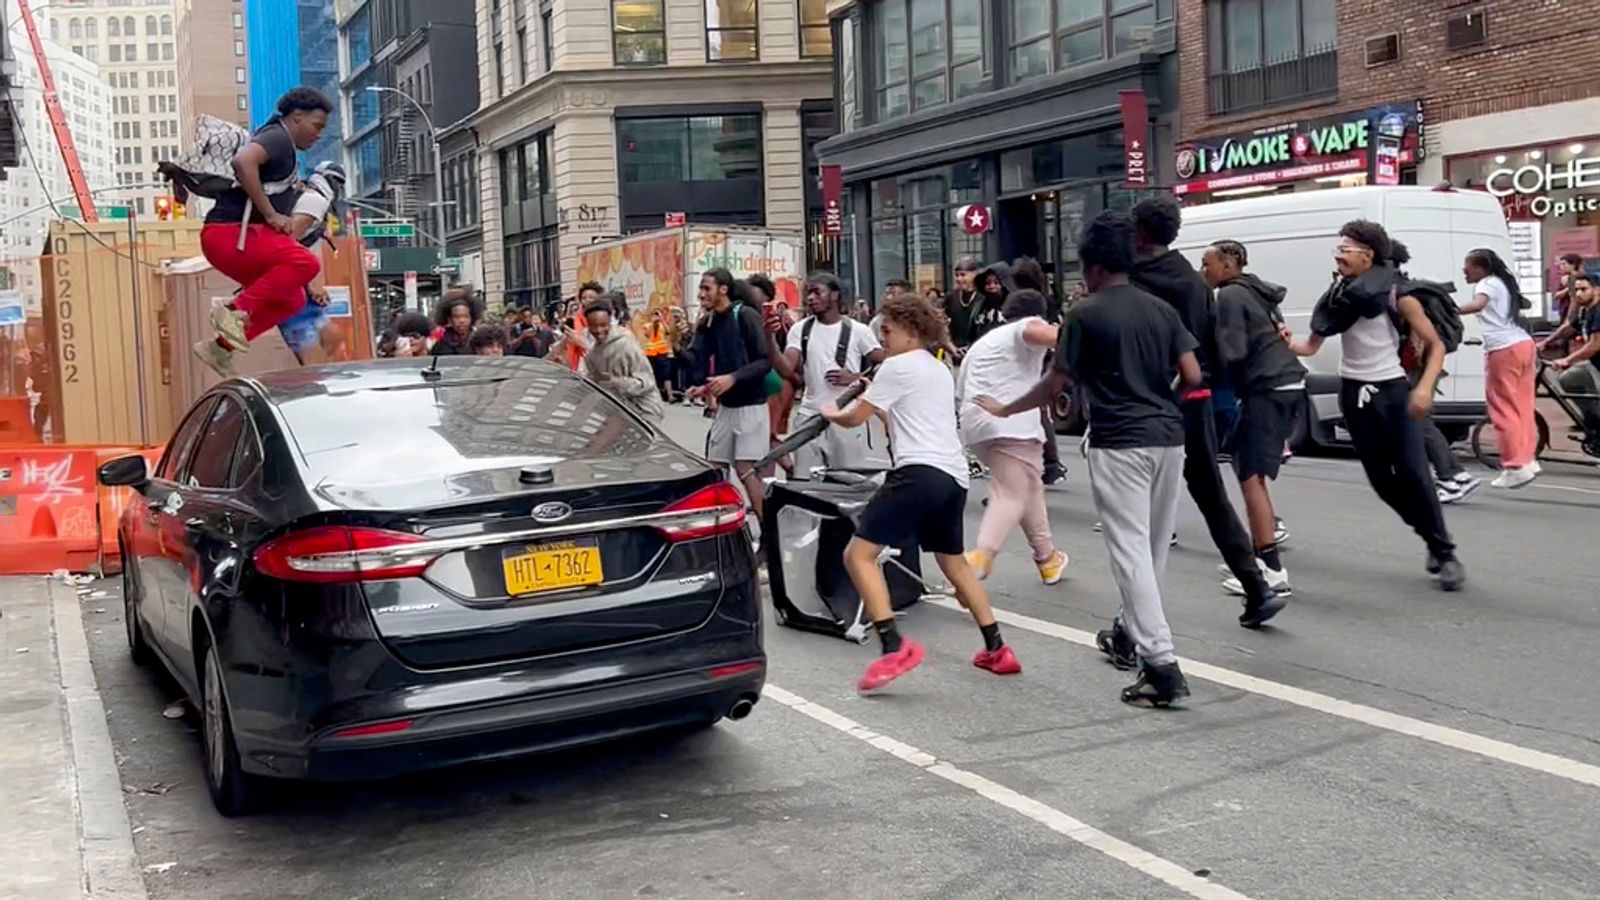 YouTuber Kai Cenat's game console giveaway sparks chaos in New York as police urge people to avoid area